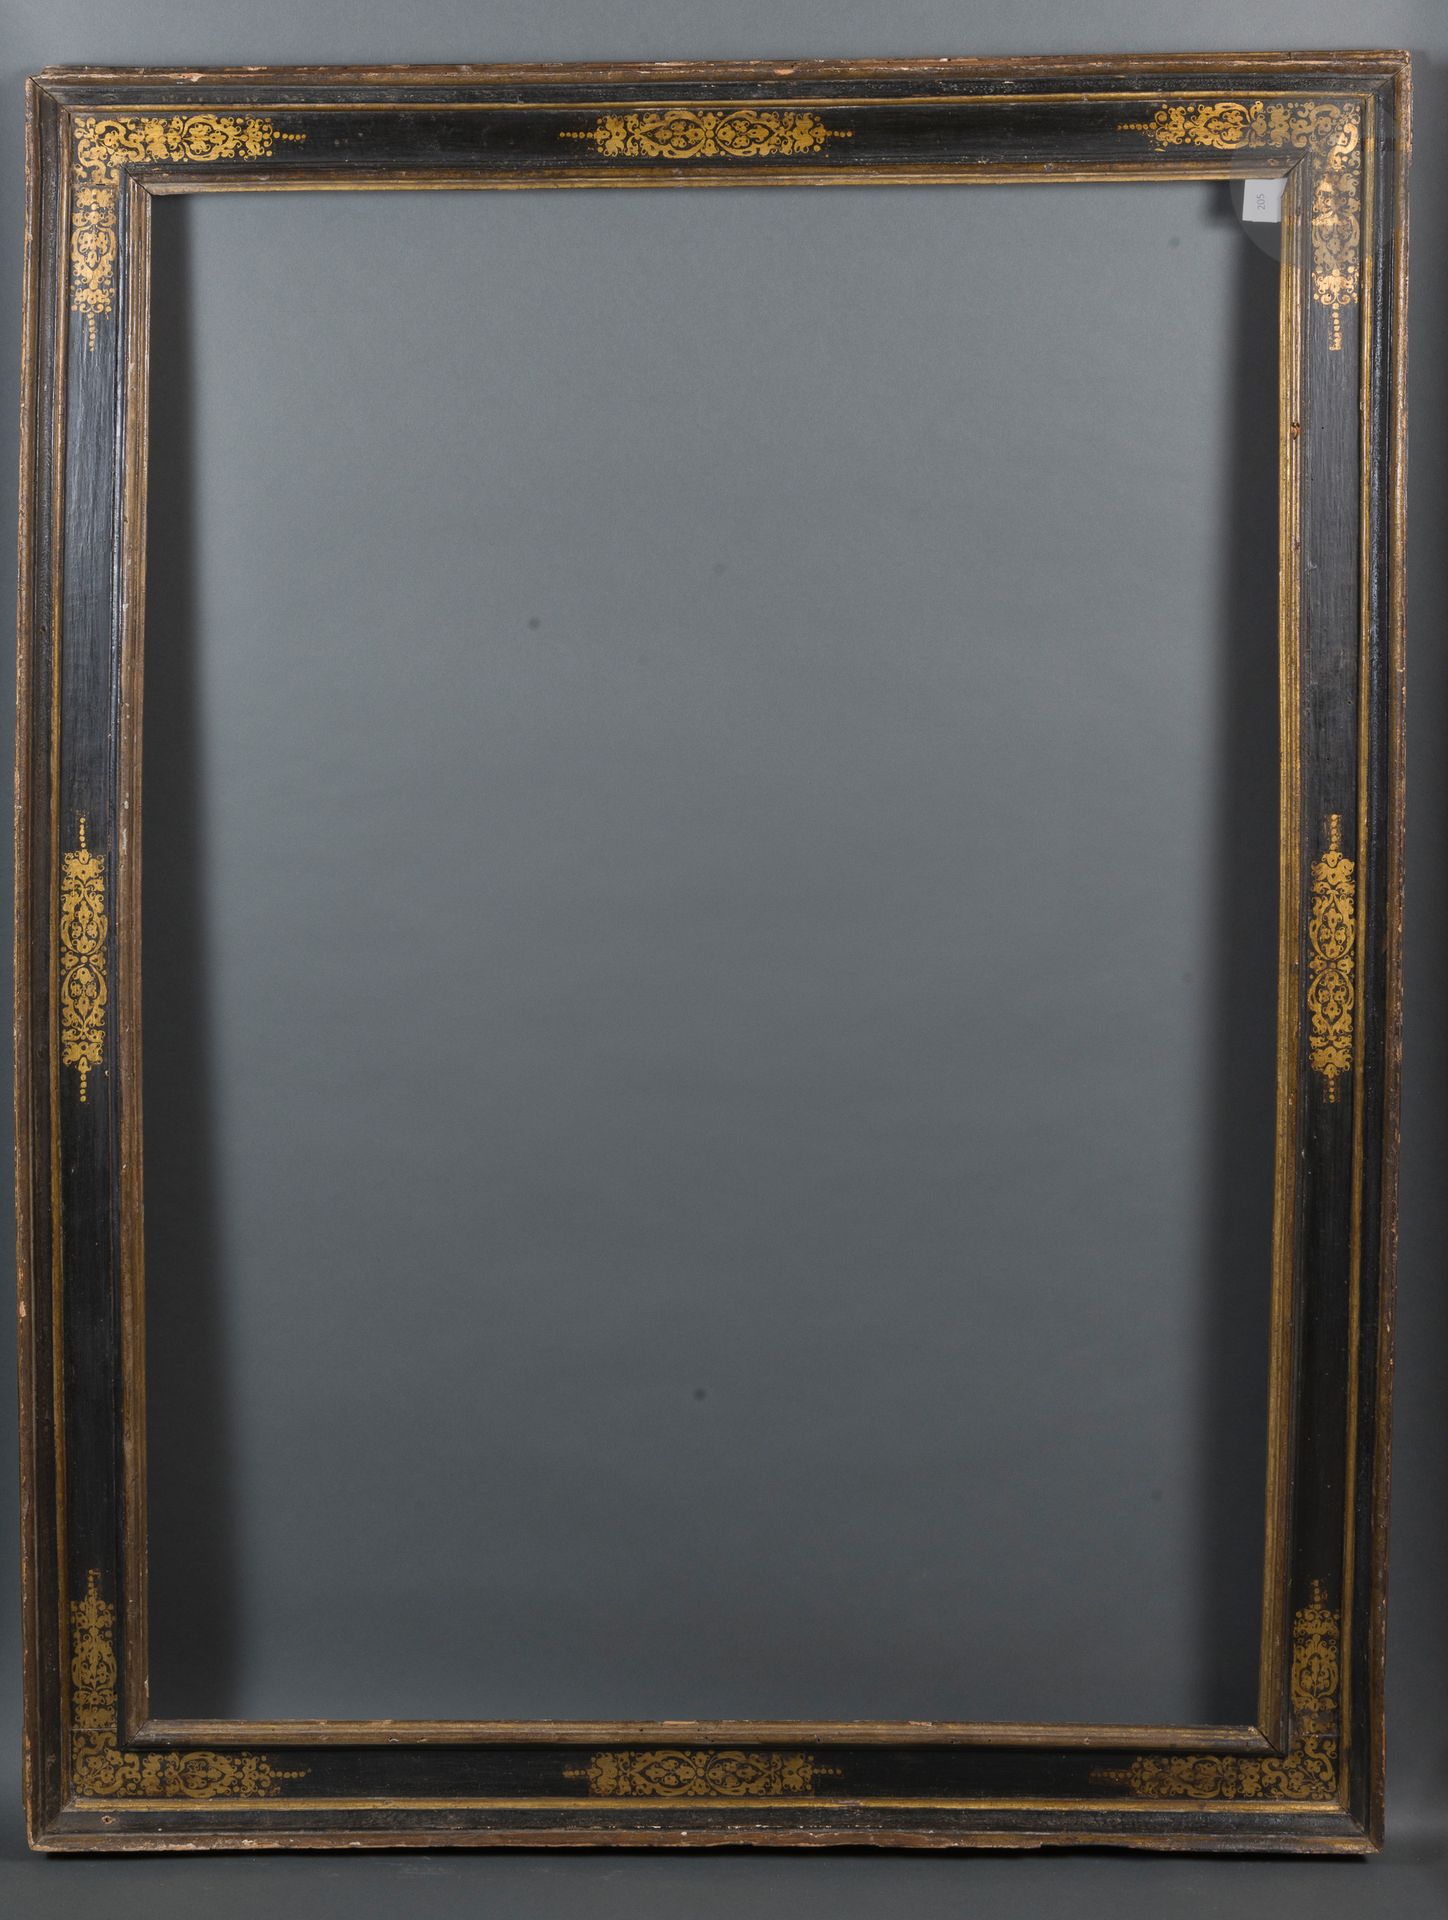 Null Cassetta frame in black and gold molded wood with scrolls in the corners an&hellip;